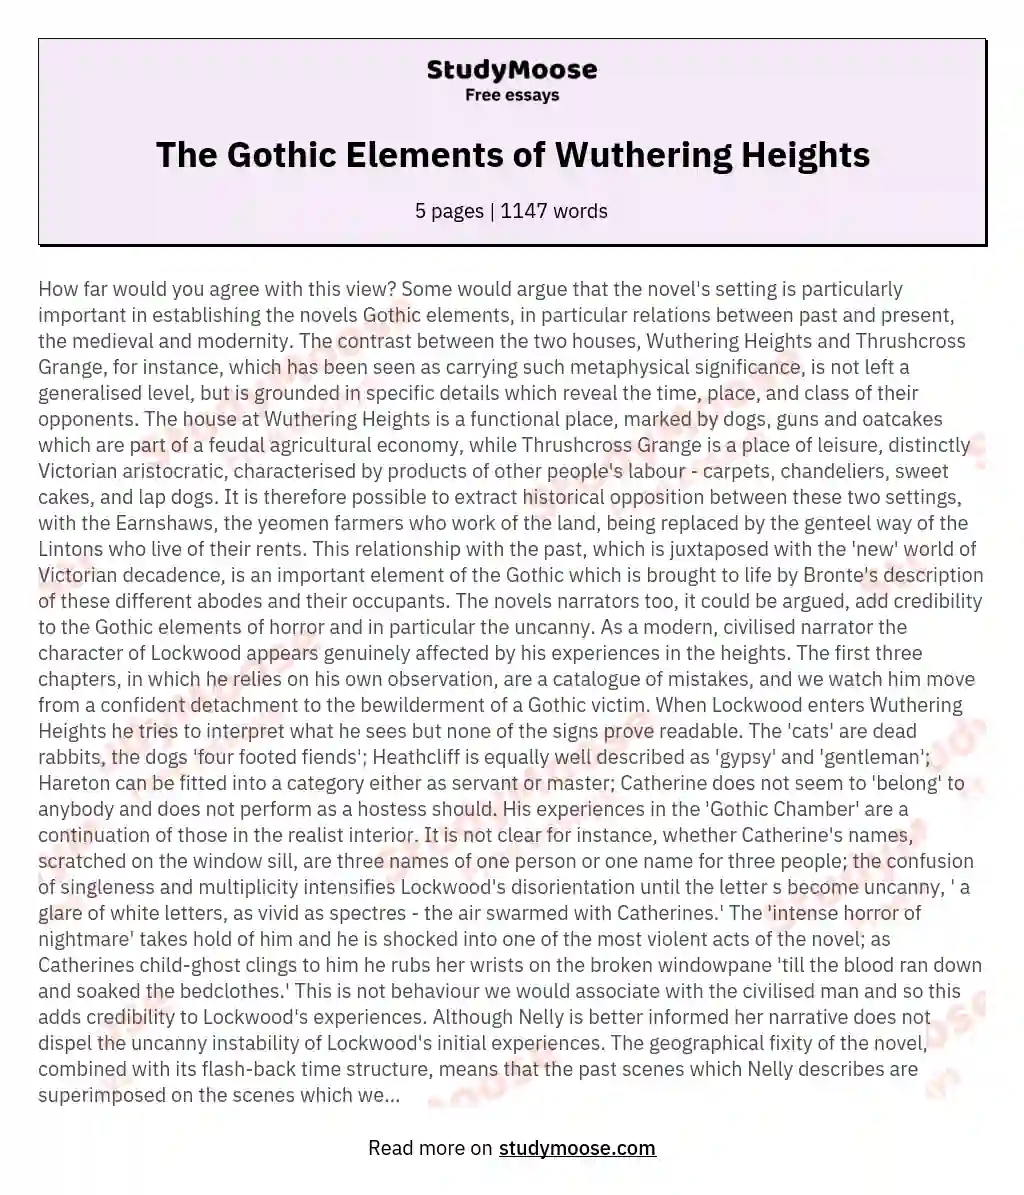 The Gothic Elements of Wuthering Heights essay